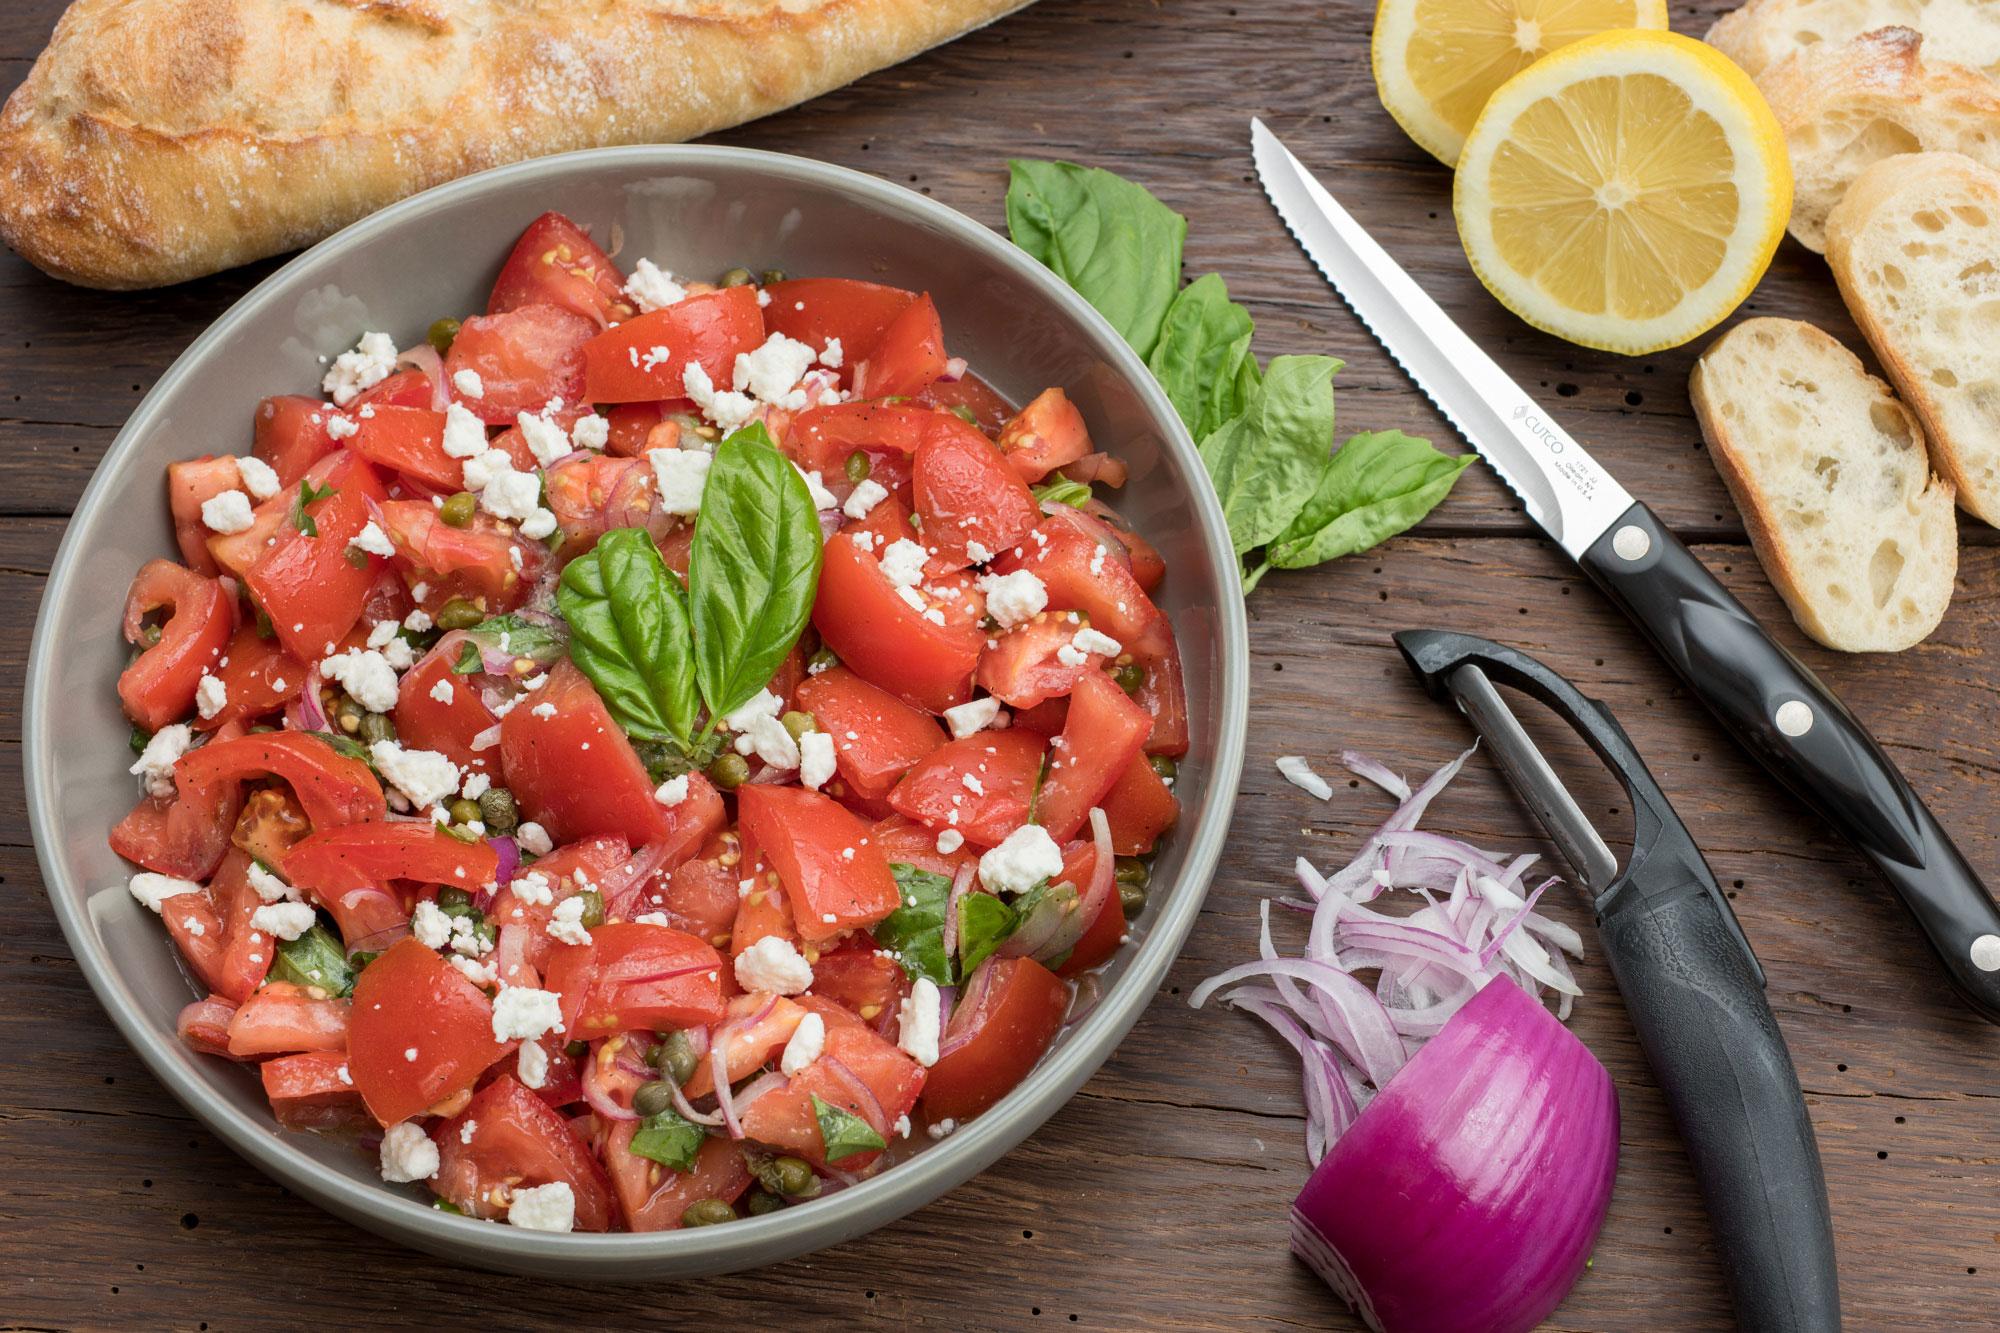 Easy Tomato Salad With Capers and Feta Cheese